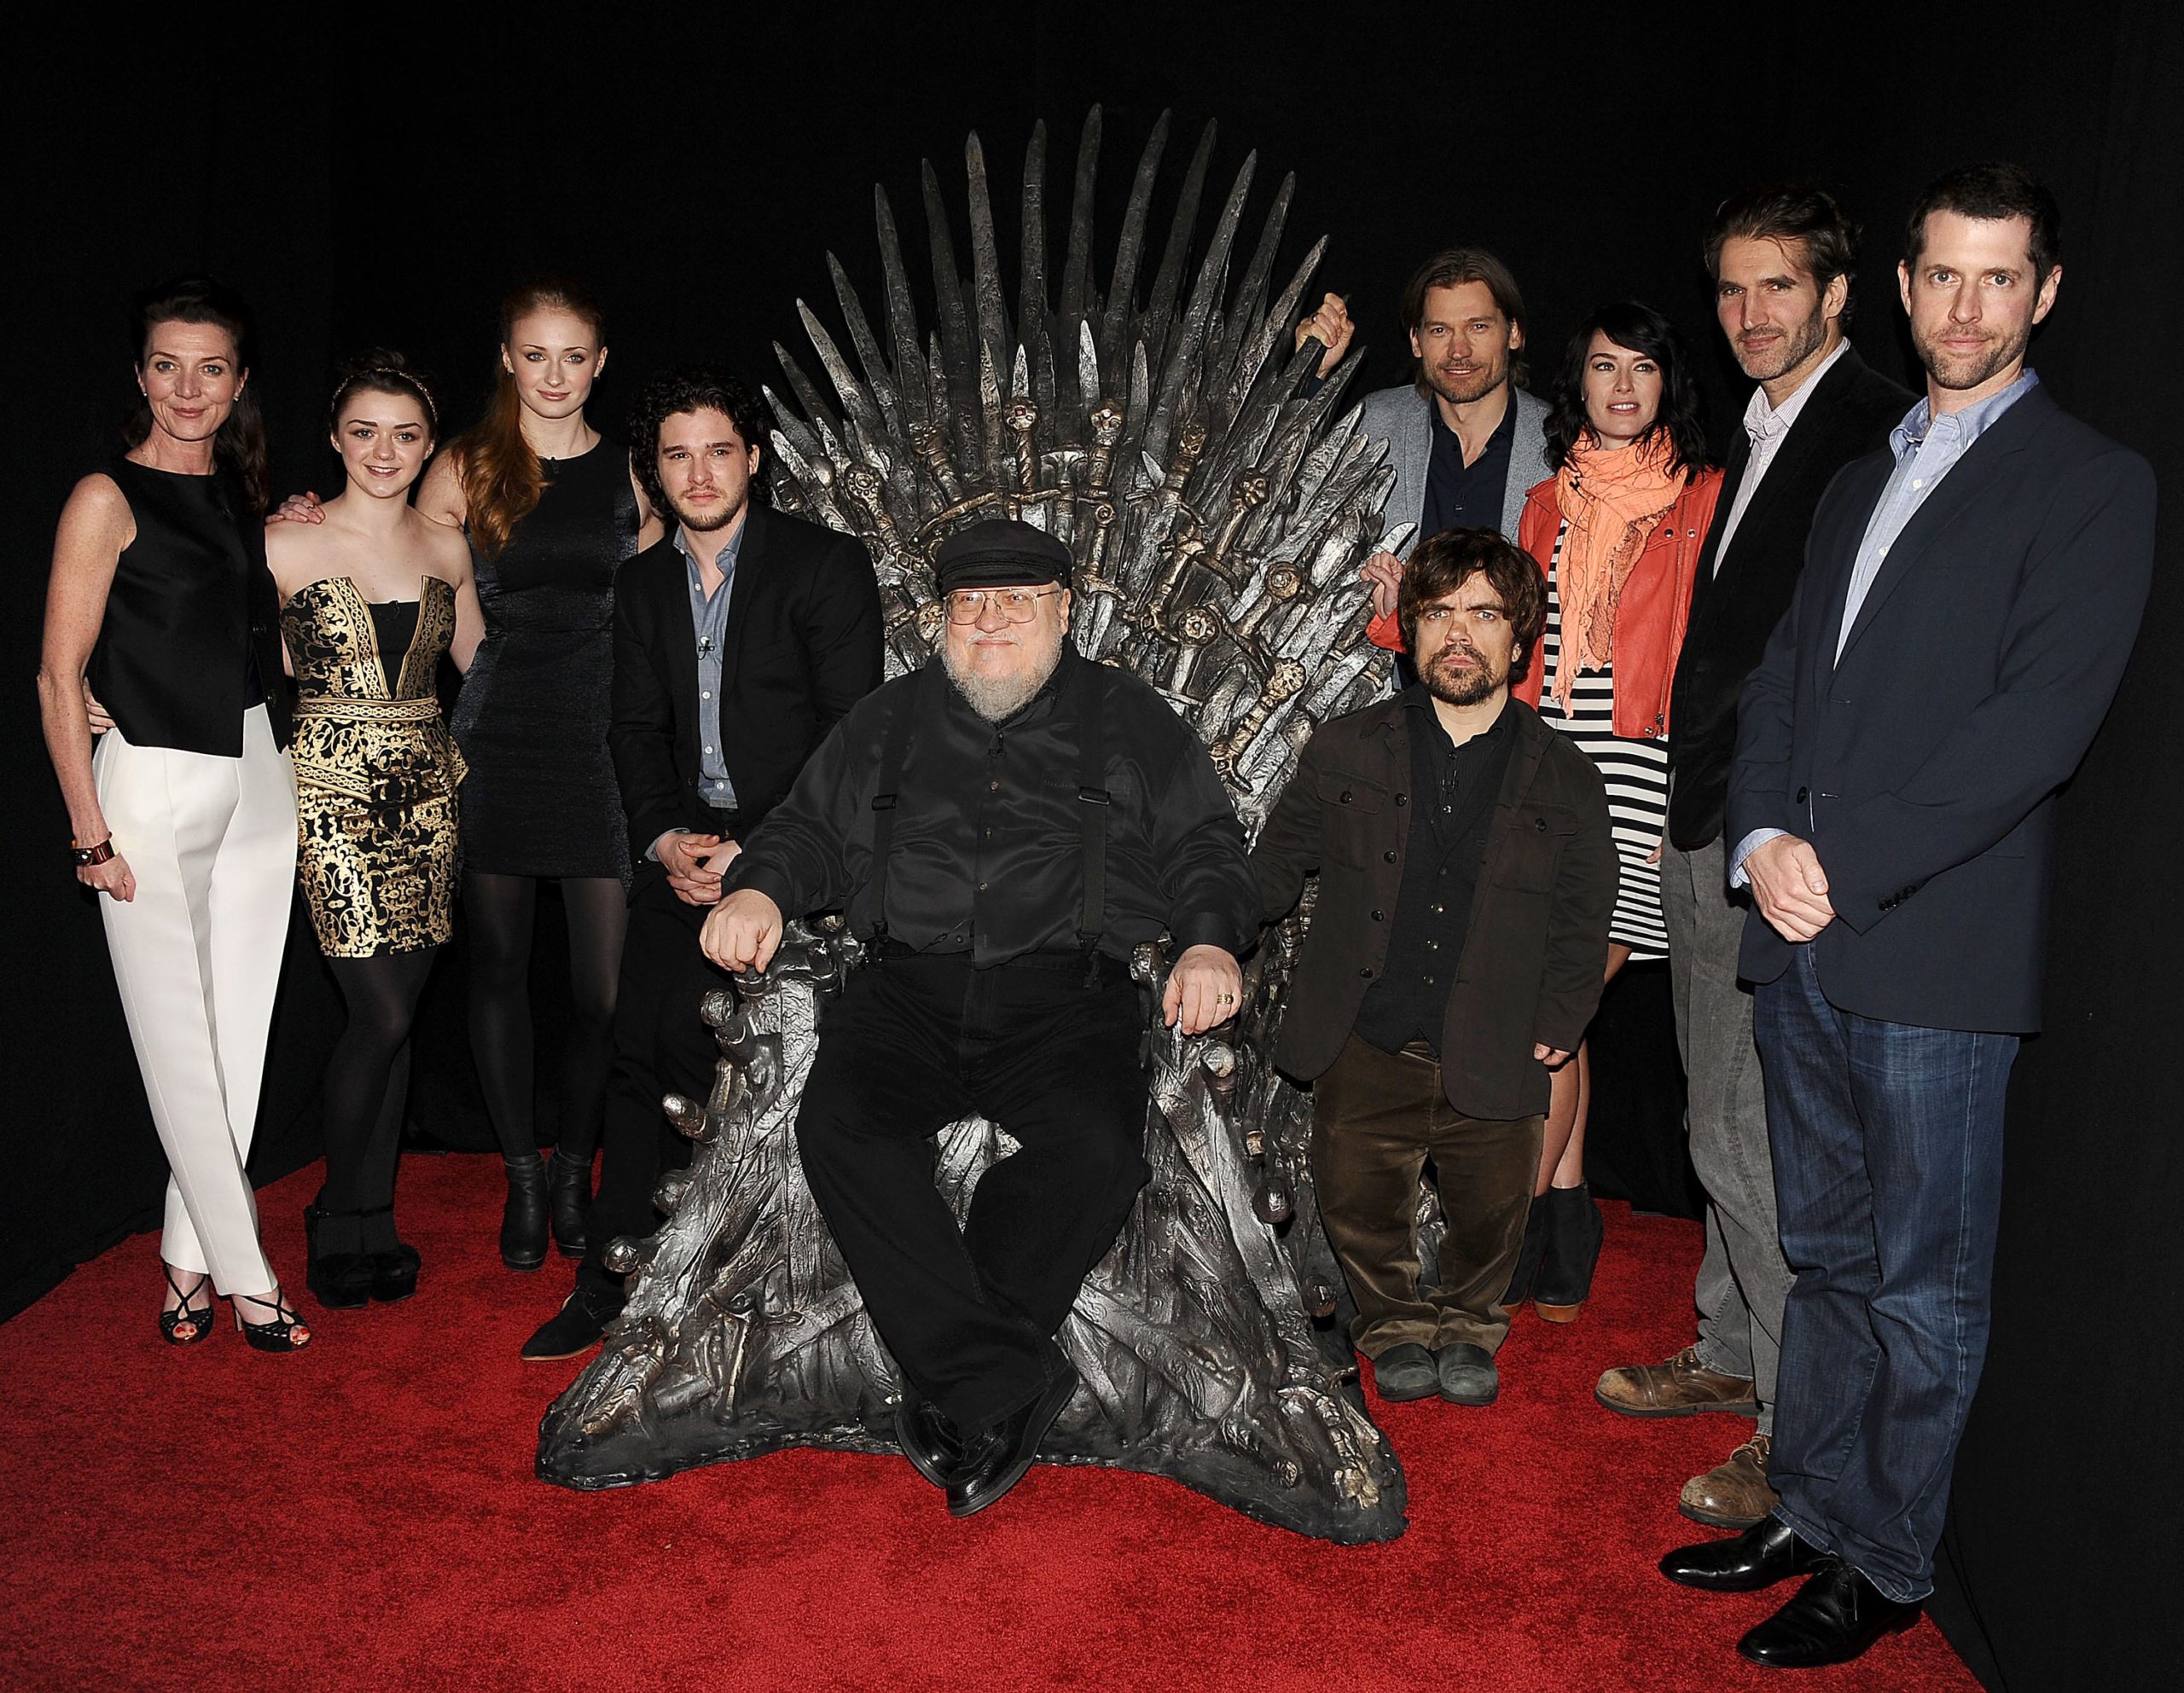 HOLLYWOOD, CA - MARCH 19:  (L-R) Actors Michelle Fairley, Maisie Williams, Sophie Turner, Kit Harington, executive producer George R.R. Martin, actors Nikolaj Coster-Waldau, Peter Dinklage, Lena Headey, co-creator/executive producer David Banioff and co-creator/executive producer D.B. Weiss attend an evening with "Game Of Thrones" at TCL Chinese Theatre on March 19, 2013 in Hollywood, California.  (Photo by Jason LaVeris/FilmMagic)